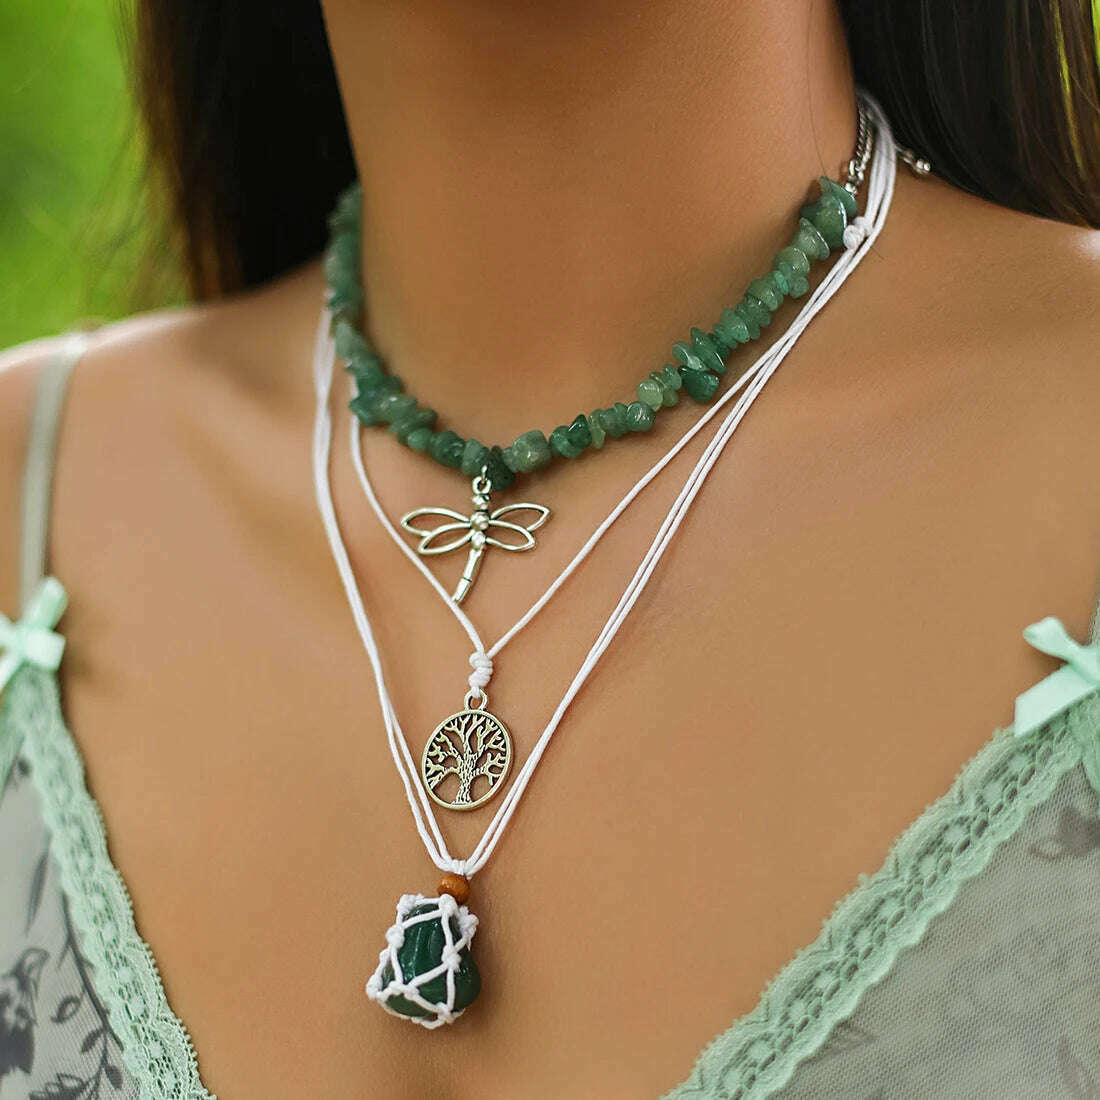 KIMLUD, 3Pcs Creative Stone Holder Cage Tree Dragonfly Pendant Choker Necklace Women Boho Rope Chain Aesthetic Y2K Jewelry Accessorie, Green Color, KIMLUD Womens Clothes